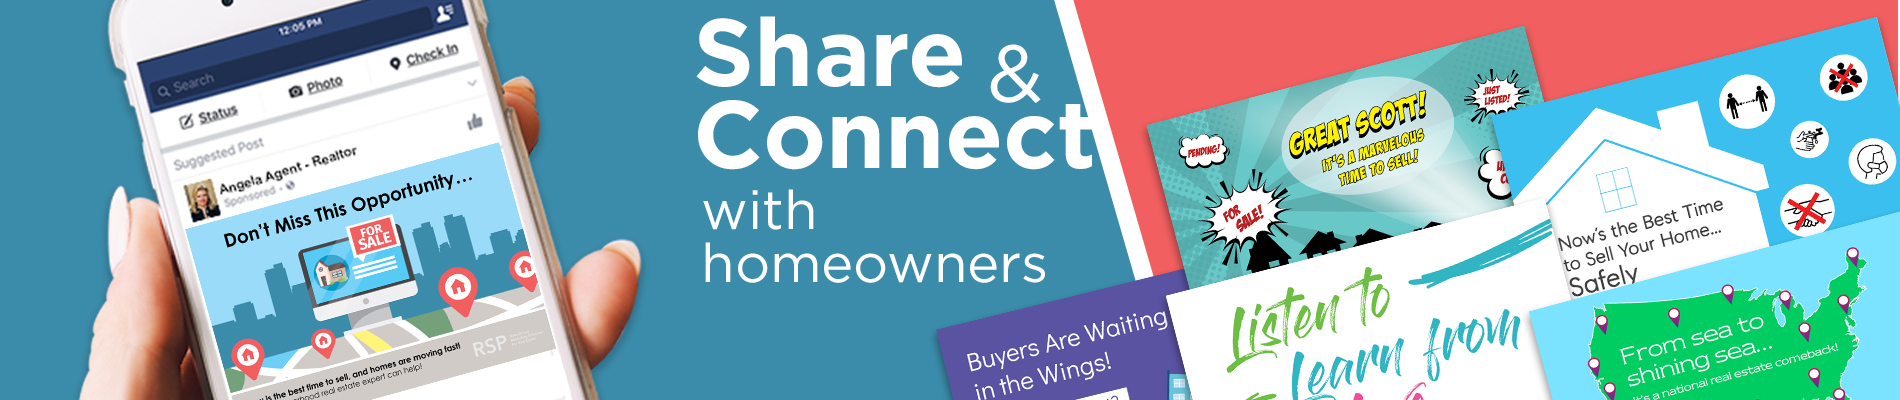 Share and connect with homeowners postcards and sponsored facebook posts